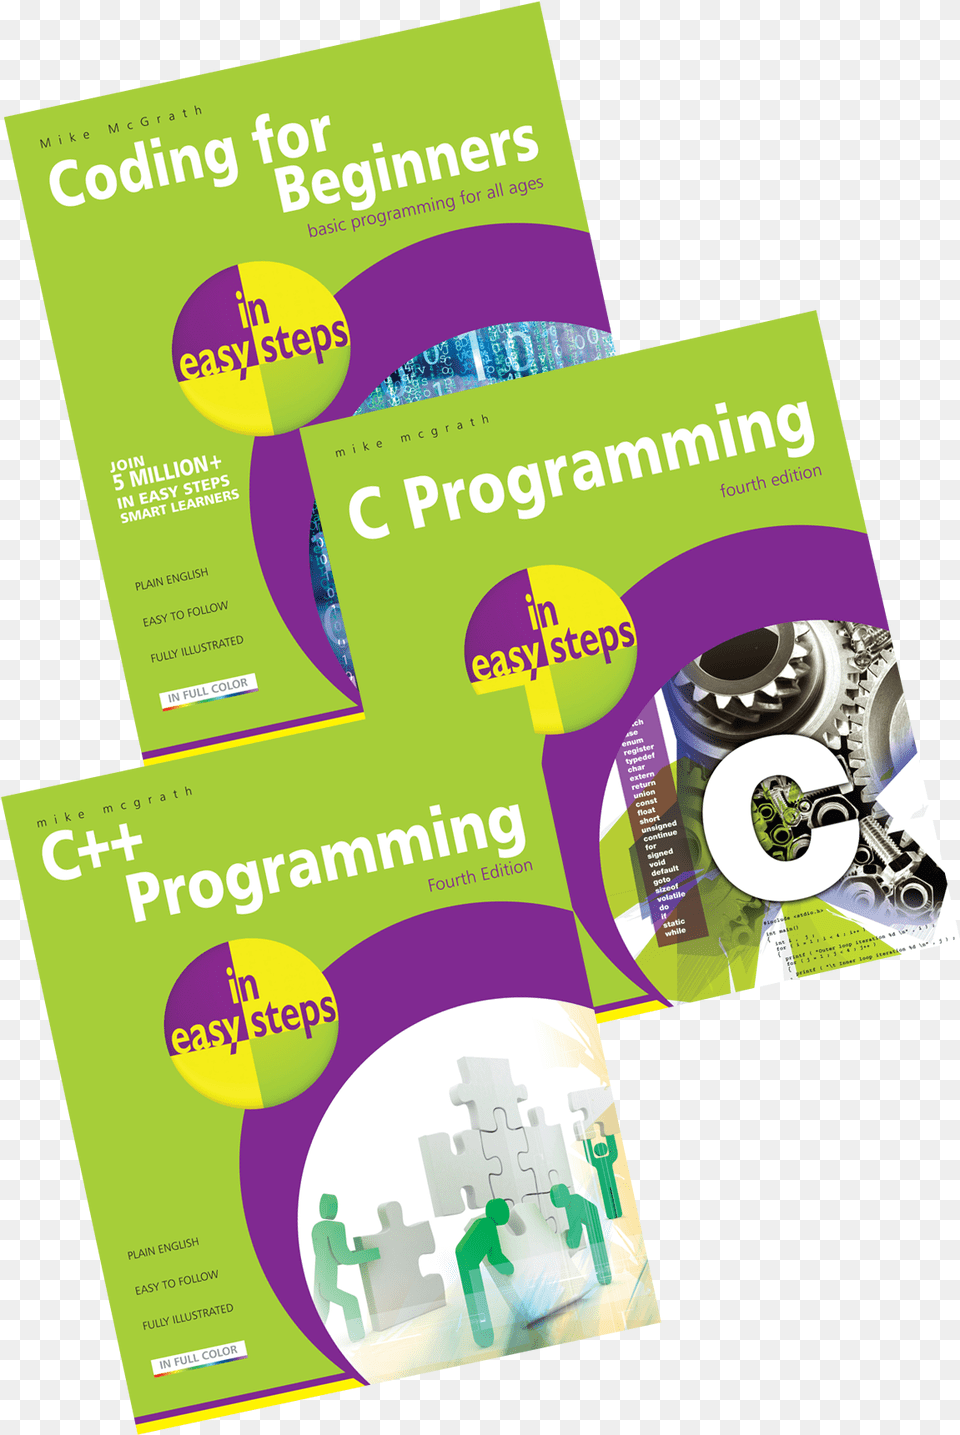 Coding For Beginners In Easy Steps C Programming In Graphic Design, Advertisement, Poster, Person, Machine Free Png Download